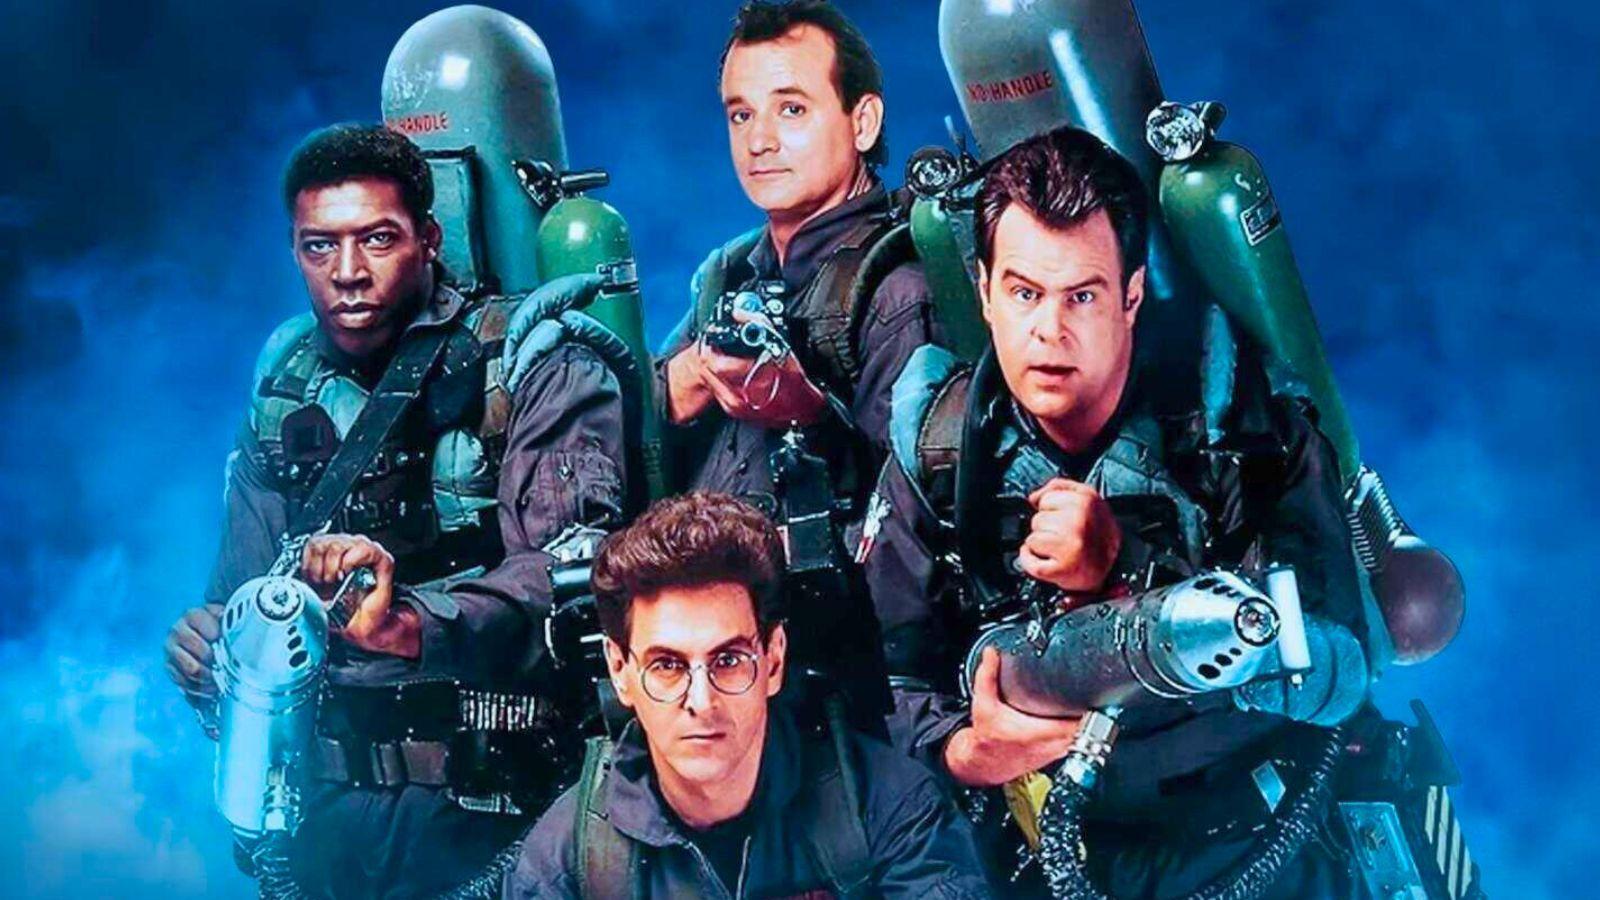 Ernie Hudson, Bill Murray, Dan Ackroyd, and Harold Ramis in a Ghostbusters 2 promotional image. They are in Ghostbusters uniforms and have their proton packs equipped.